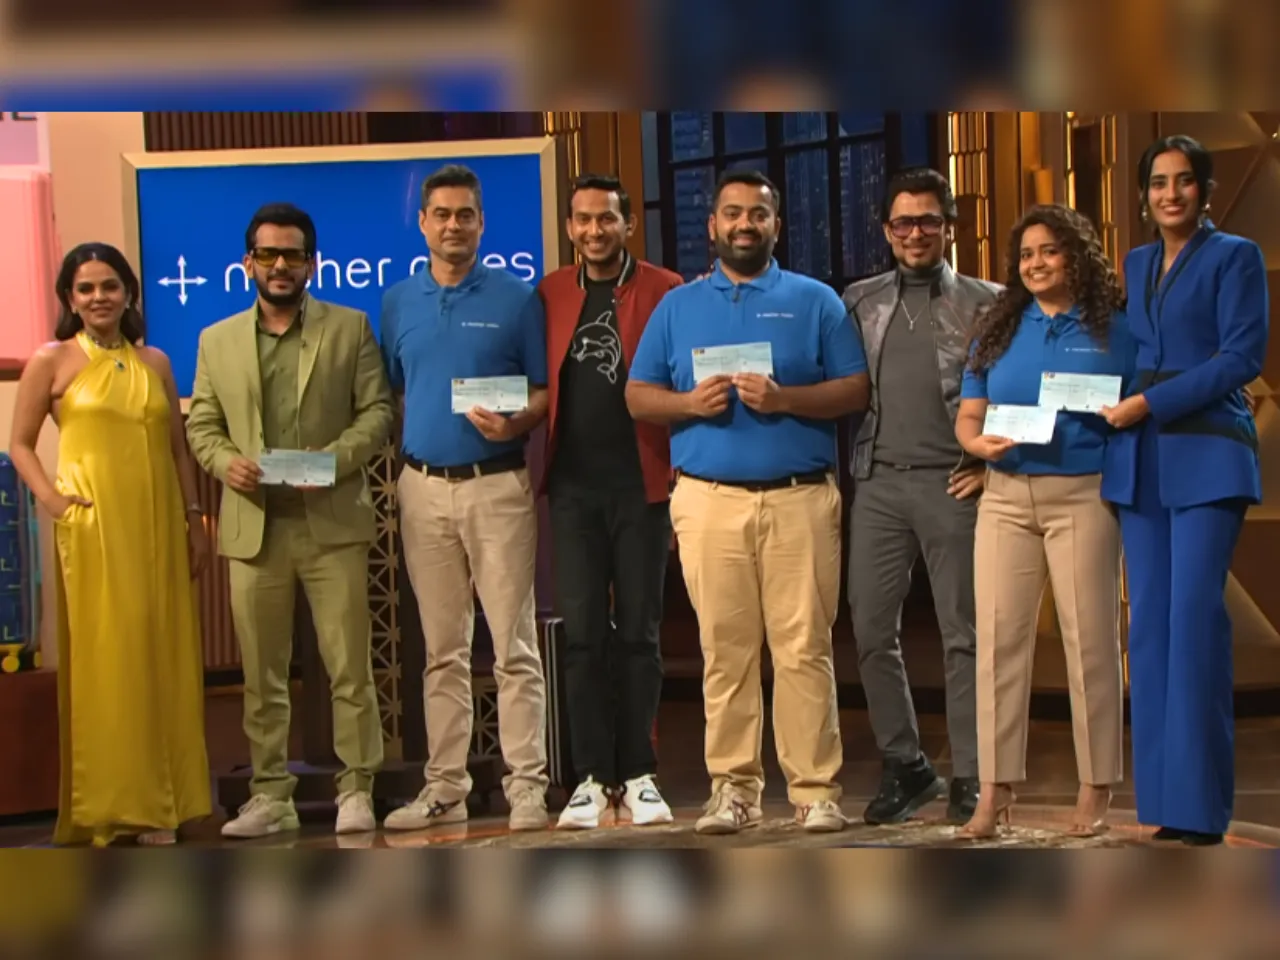 Nasher Miles secures Rs 3 crore in funding on Shark Tank India